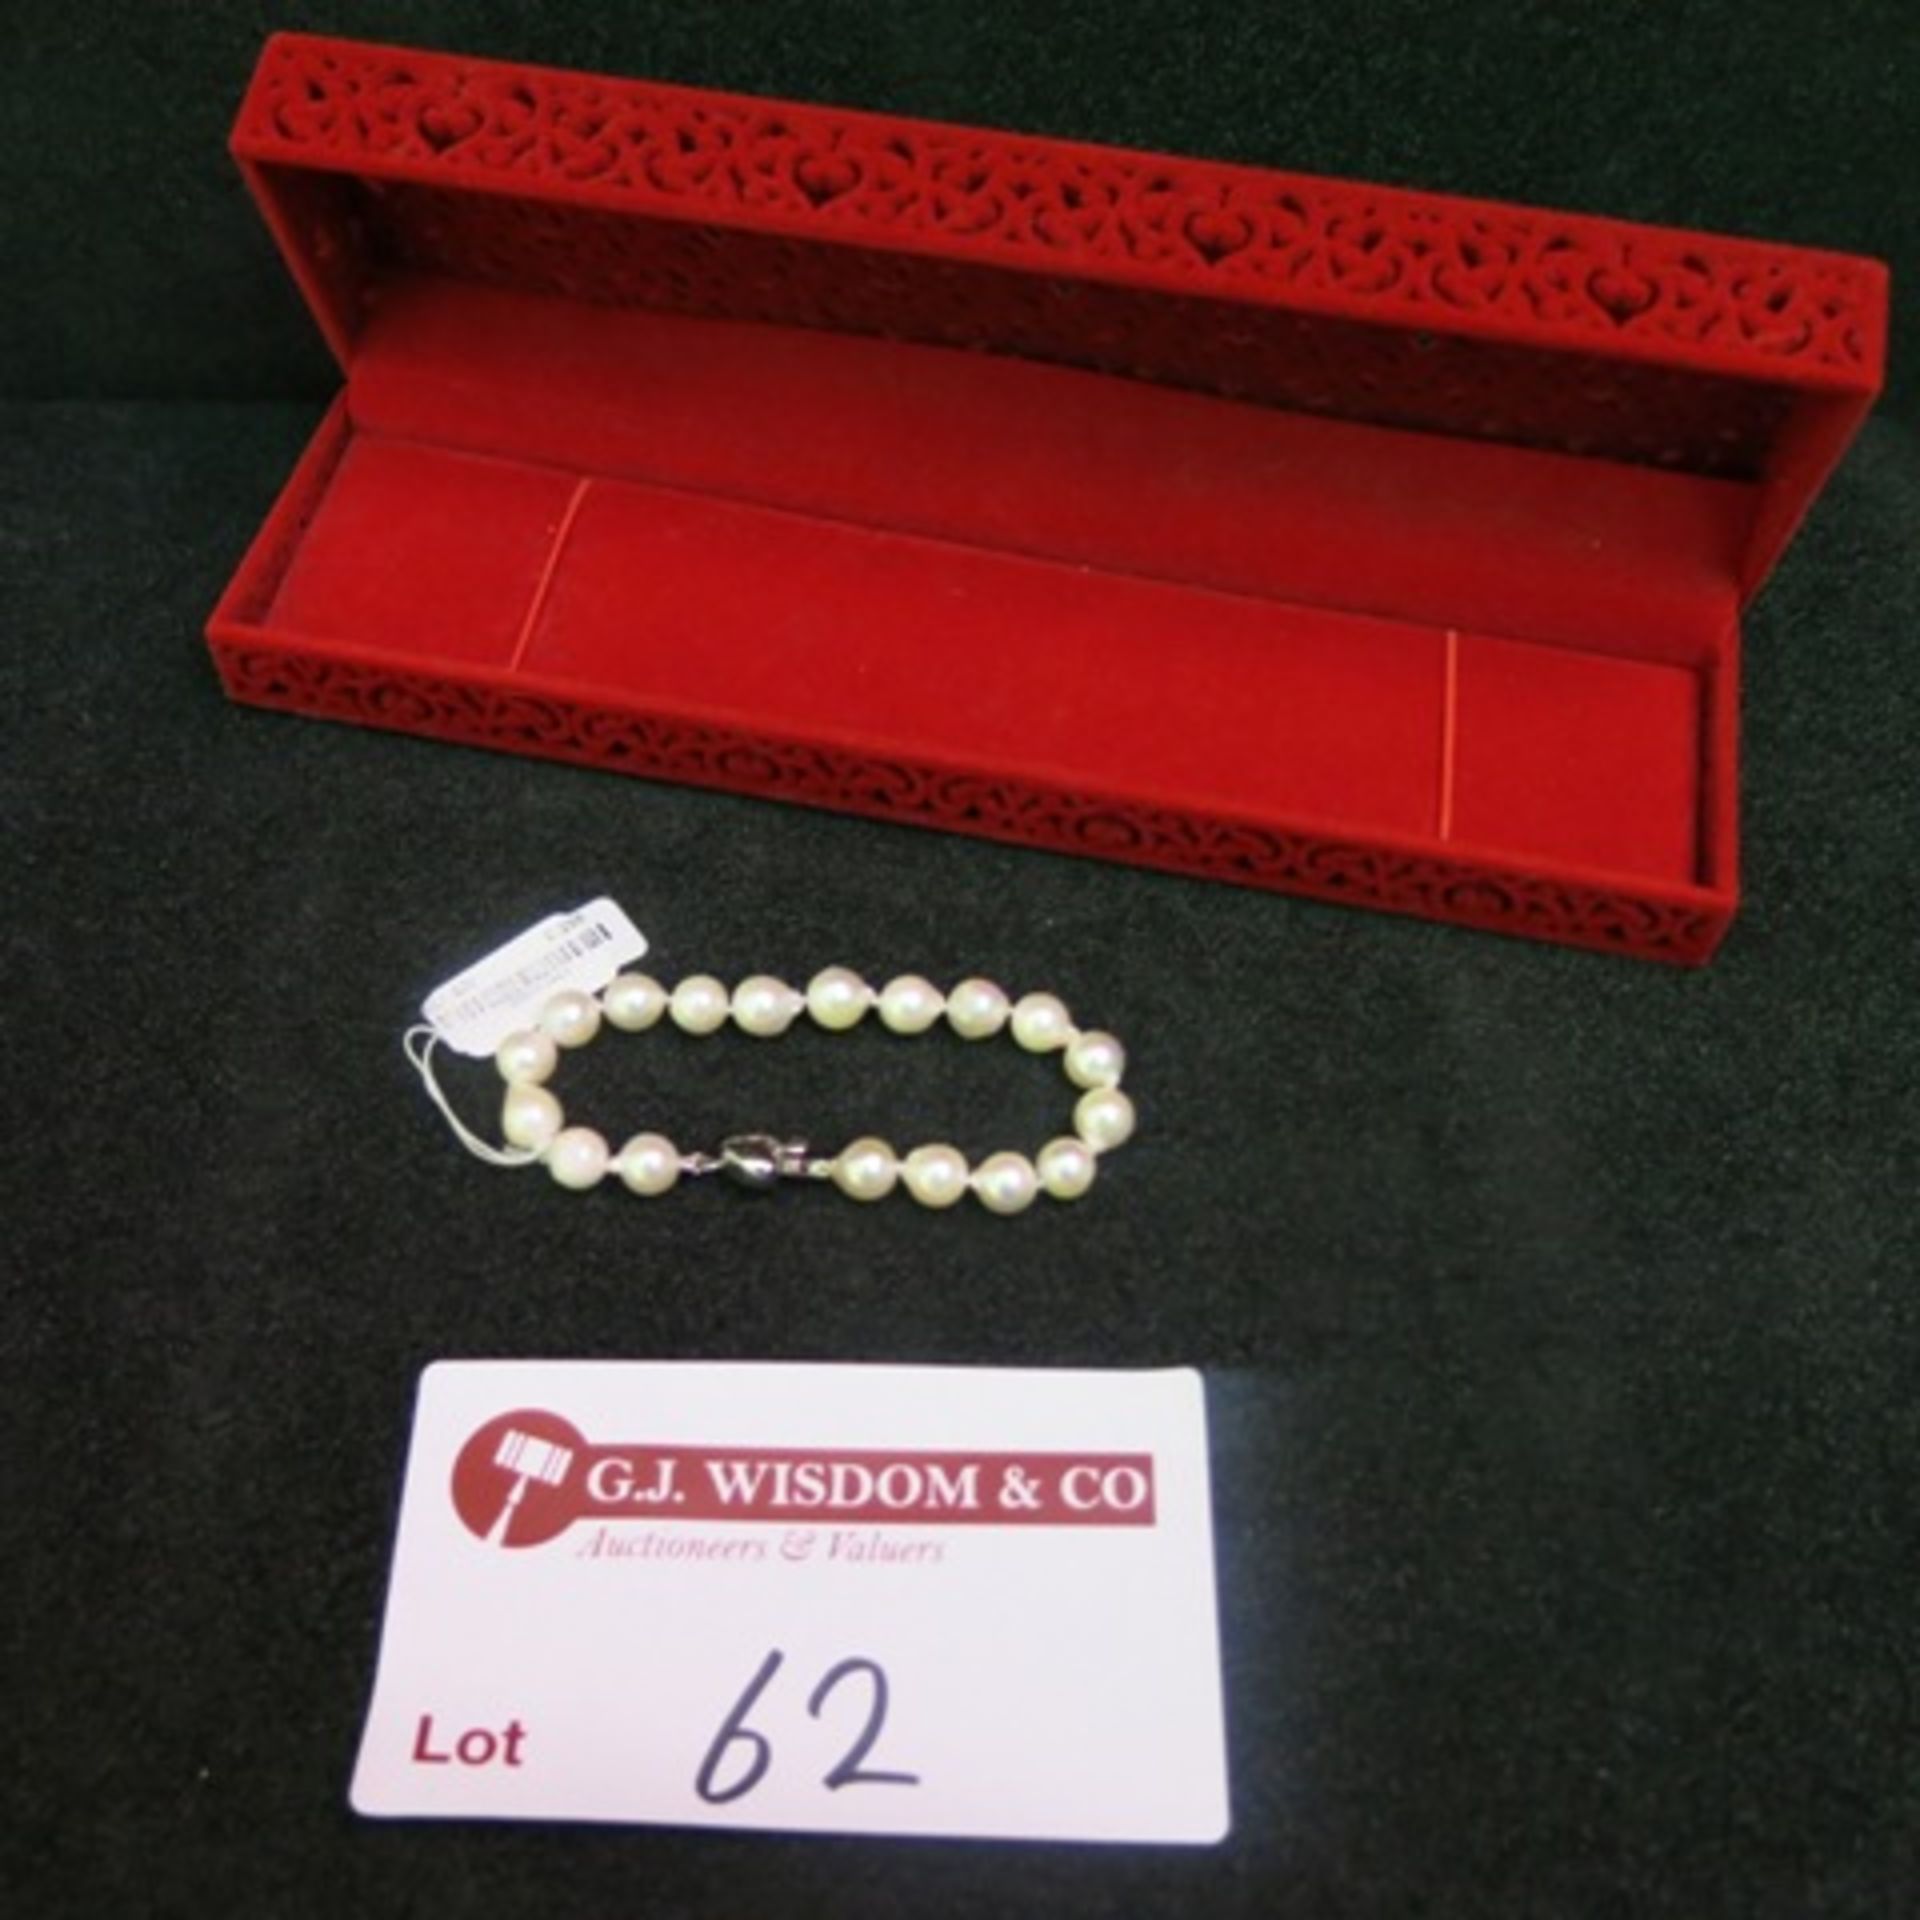 Pearl Bracelet (8mm) with Silver (925) Heart Shaped Clasp in Presentation Case. RRP £258.00